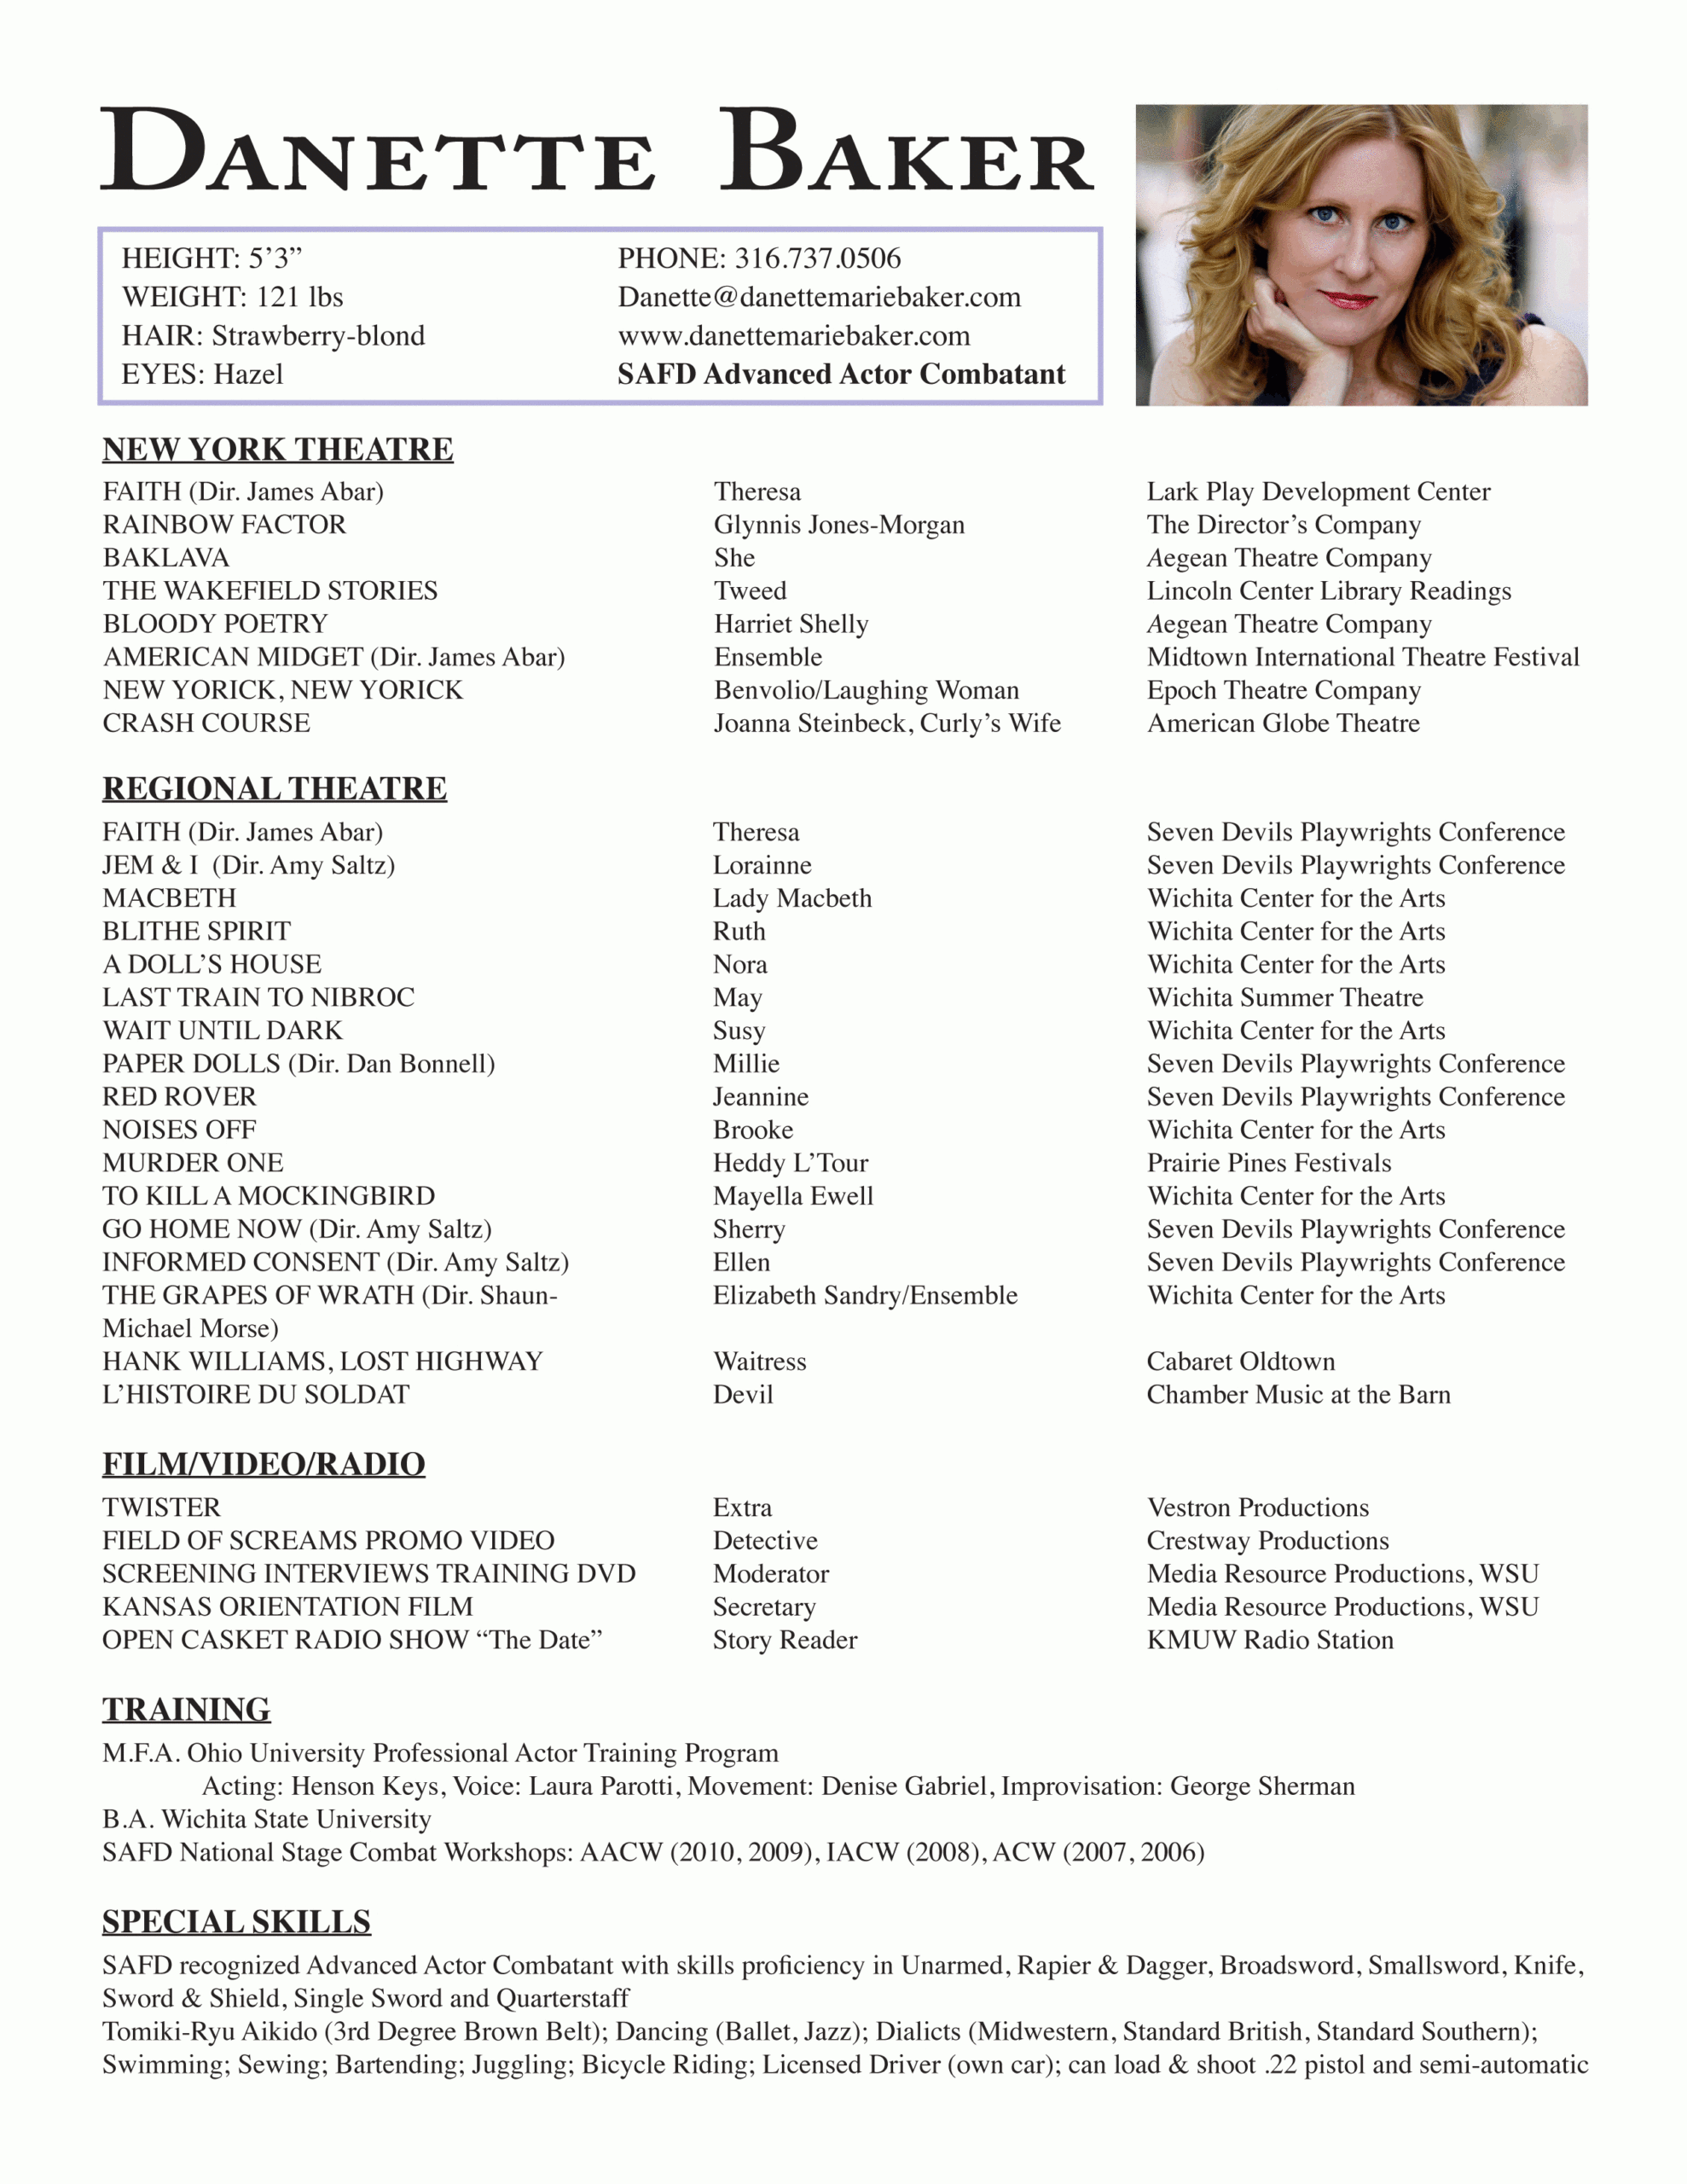 Resume Format Actor | Bookkeeping Skills For Resume With Theatrical Resume Template Word